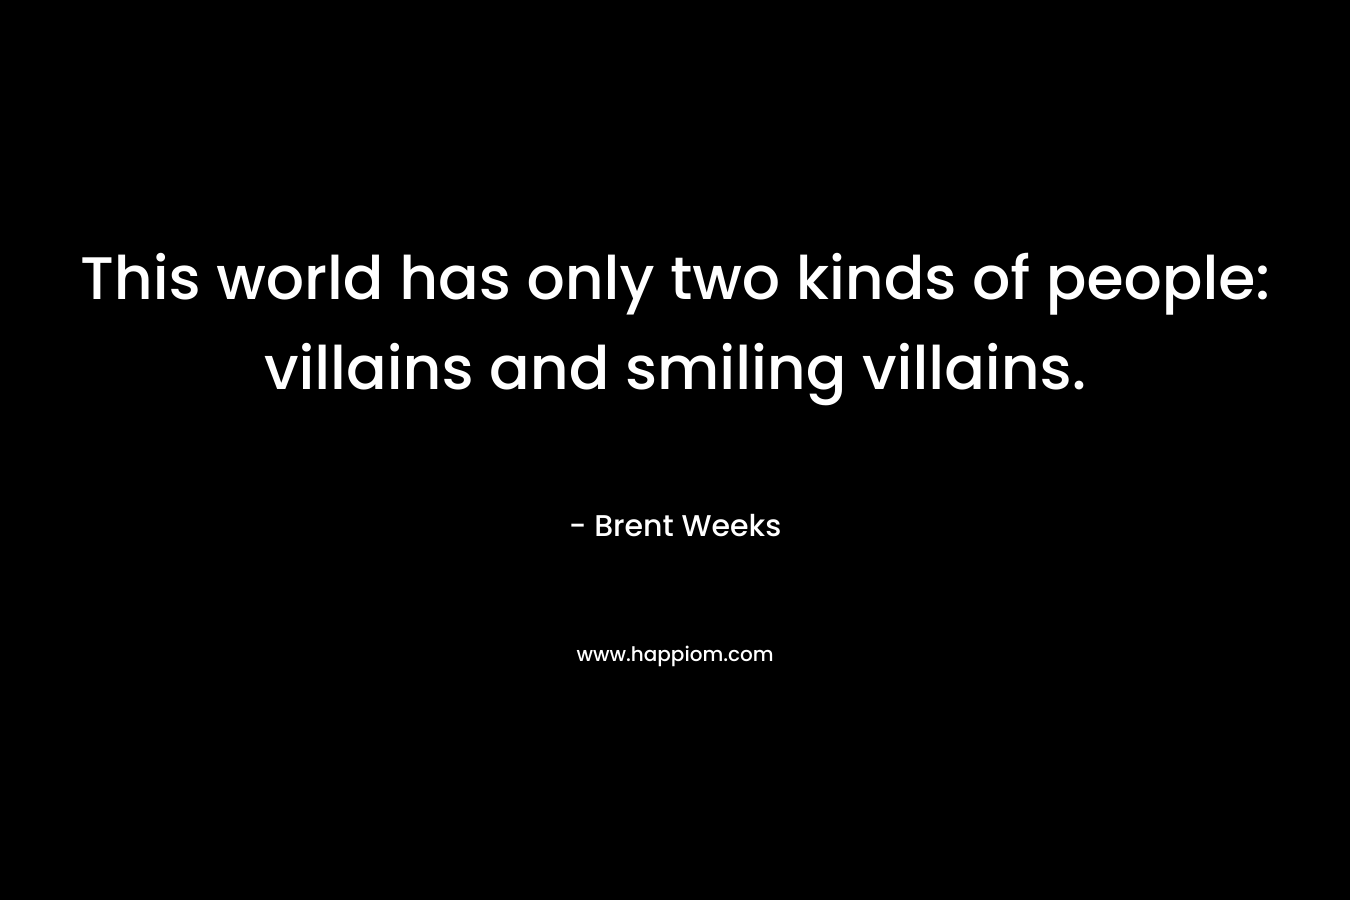 This world has only two kinds of people: villains and smiling villains.